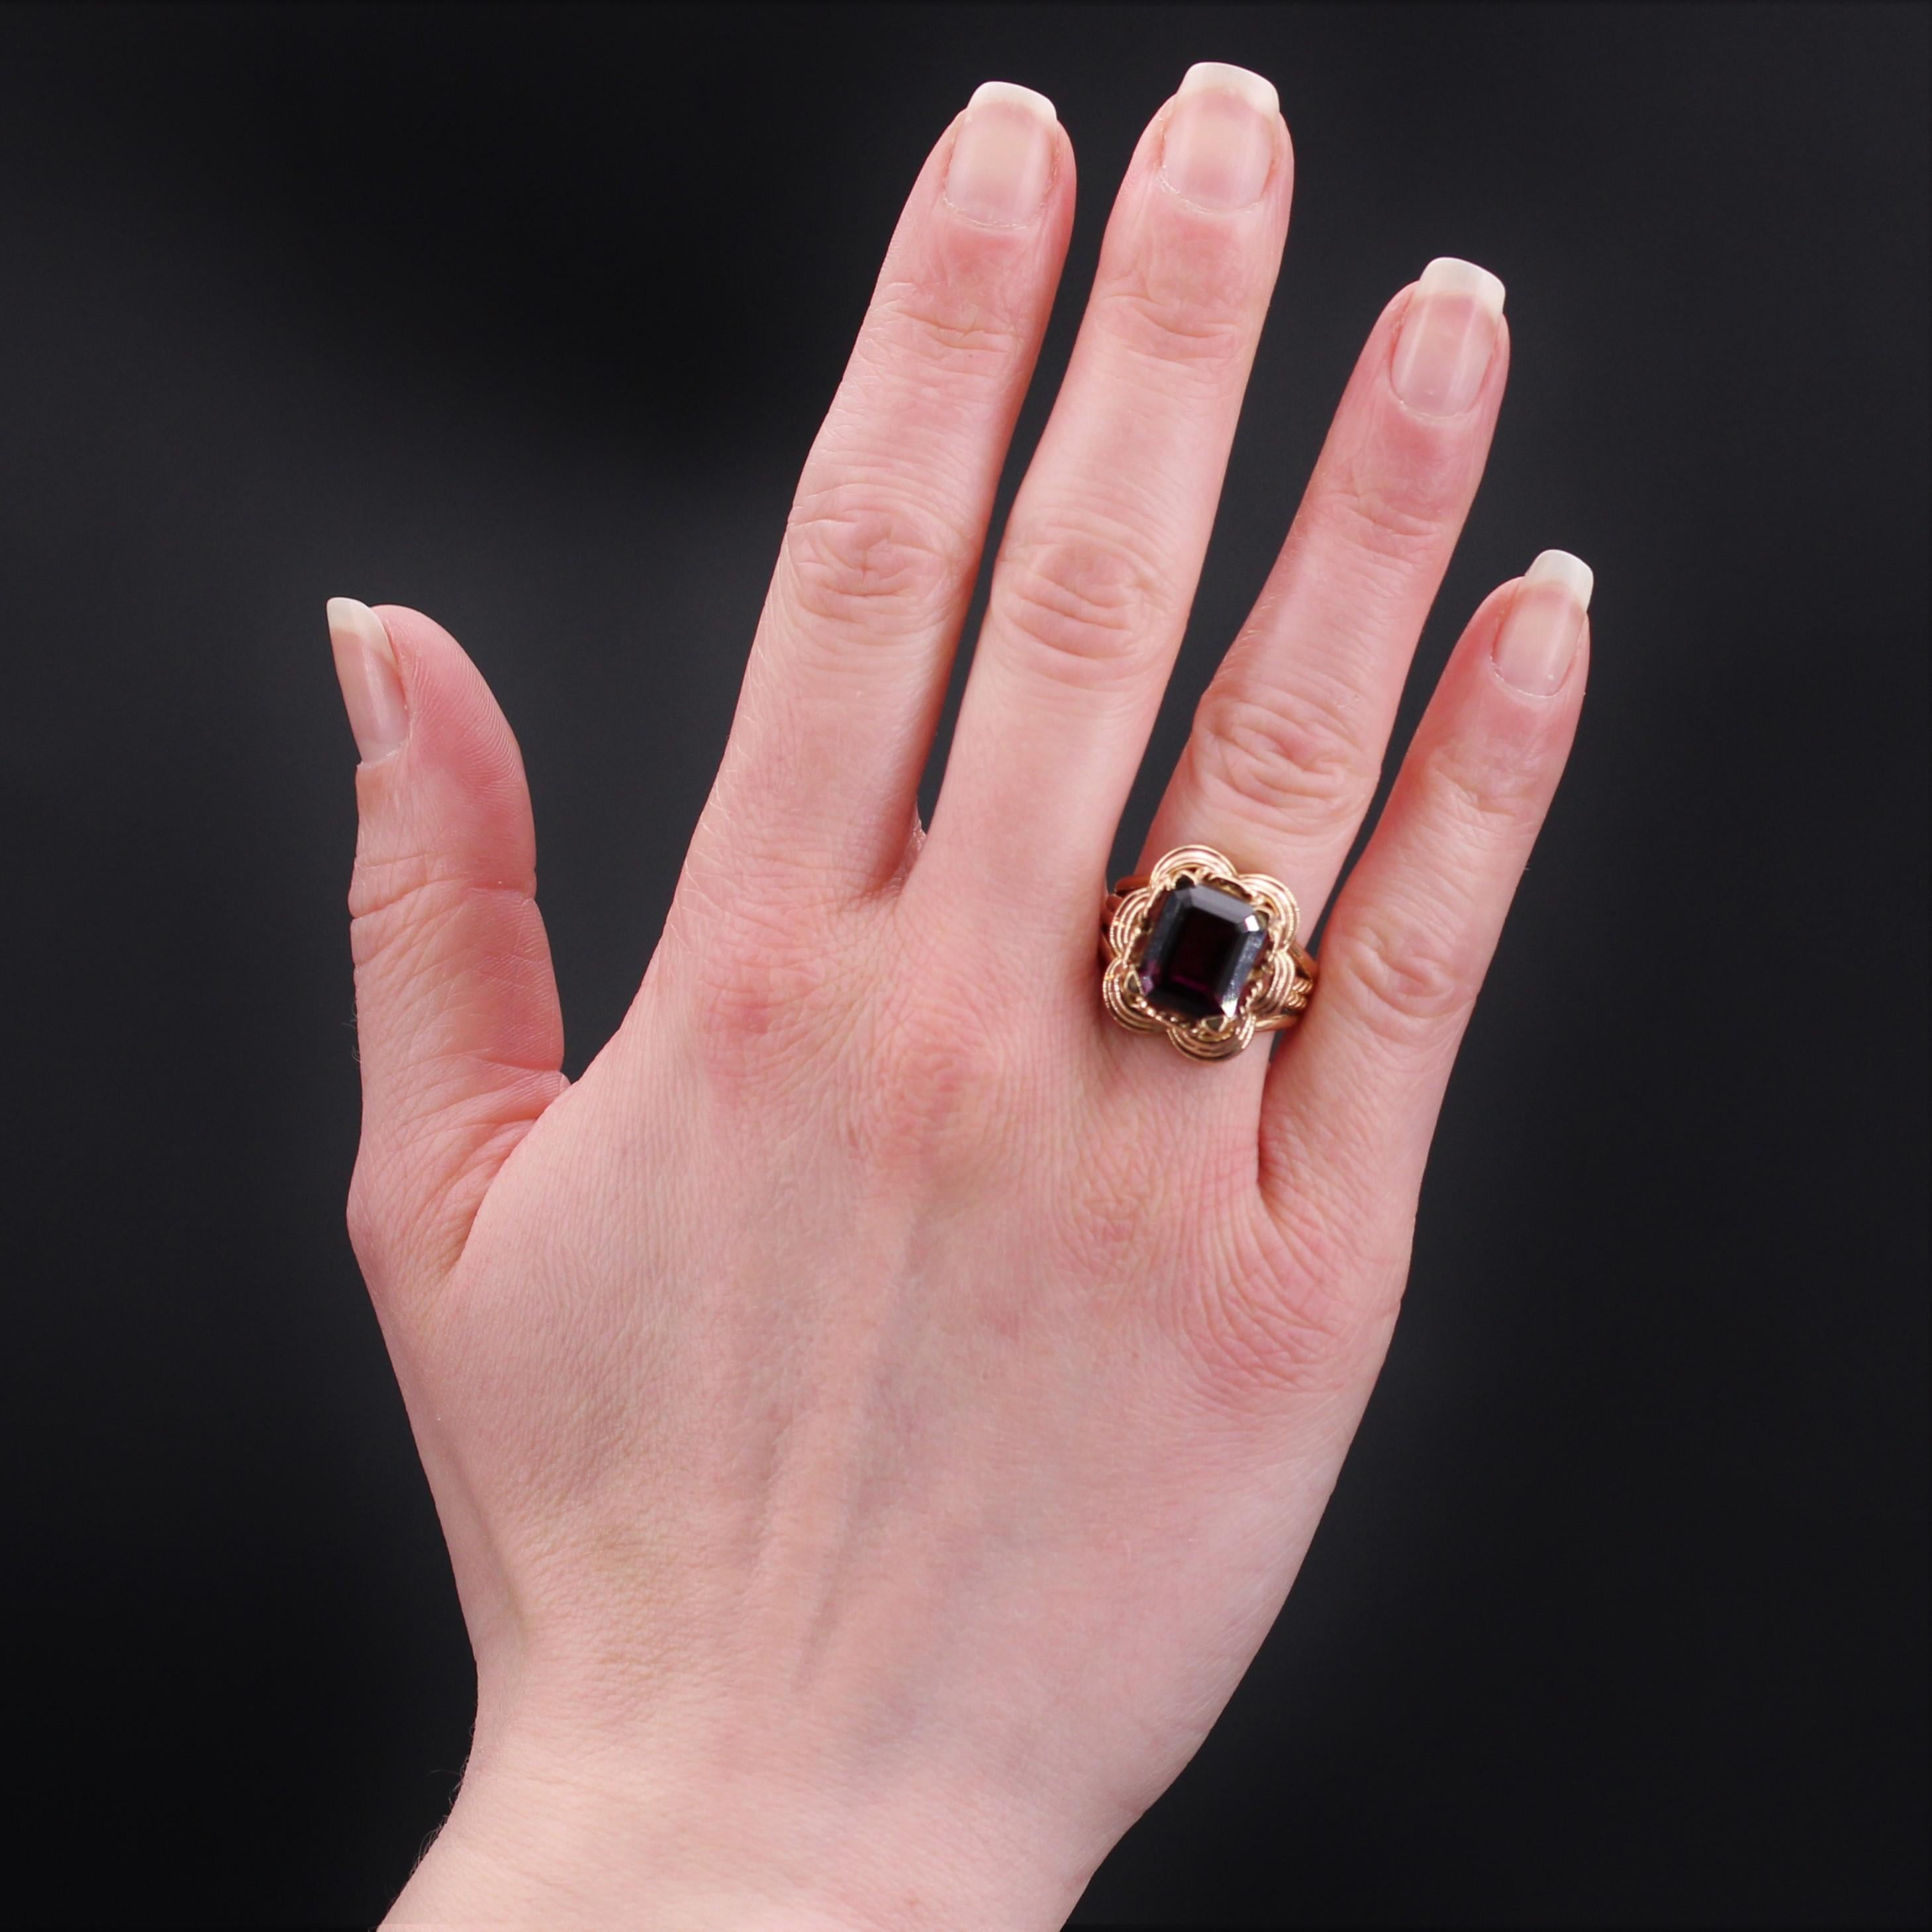 Ring in 18 karat rose gold, eagle head hallmark.
Important retro rose gold ring, its ring is formed of 4 gold wires which meet at the base, the 2 central ones being twisted. They support a basket decorated with a basketry, and set on the top of a